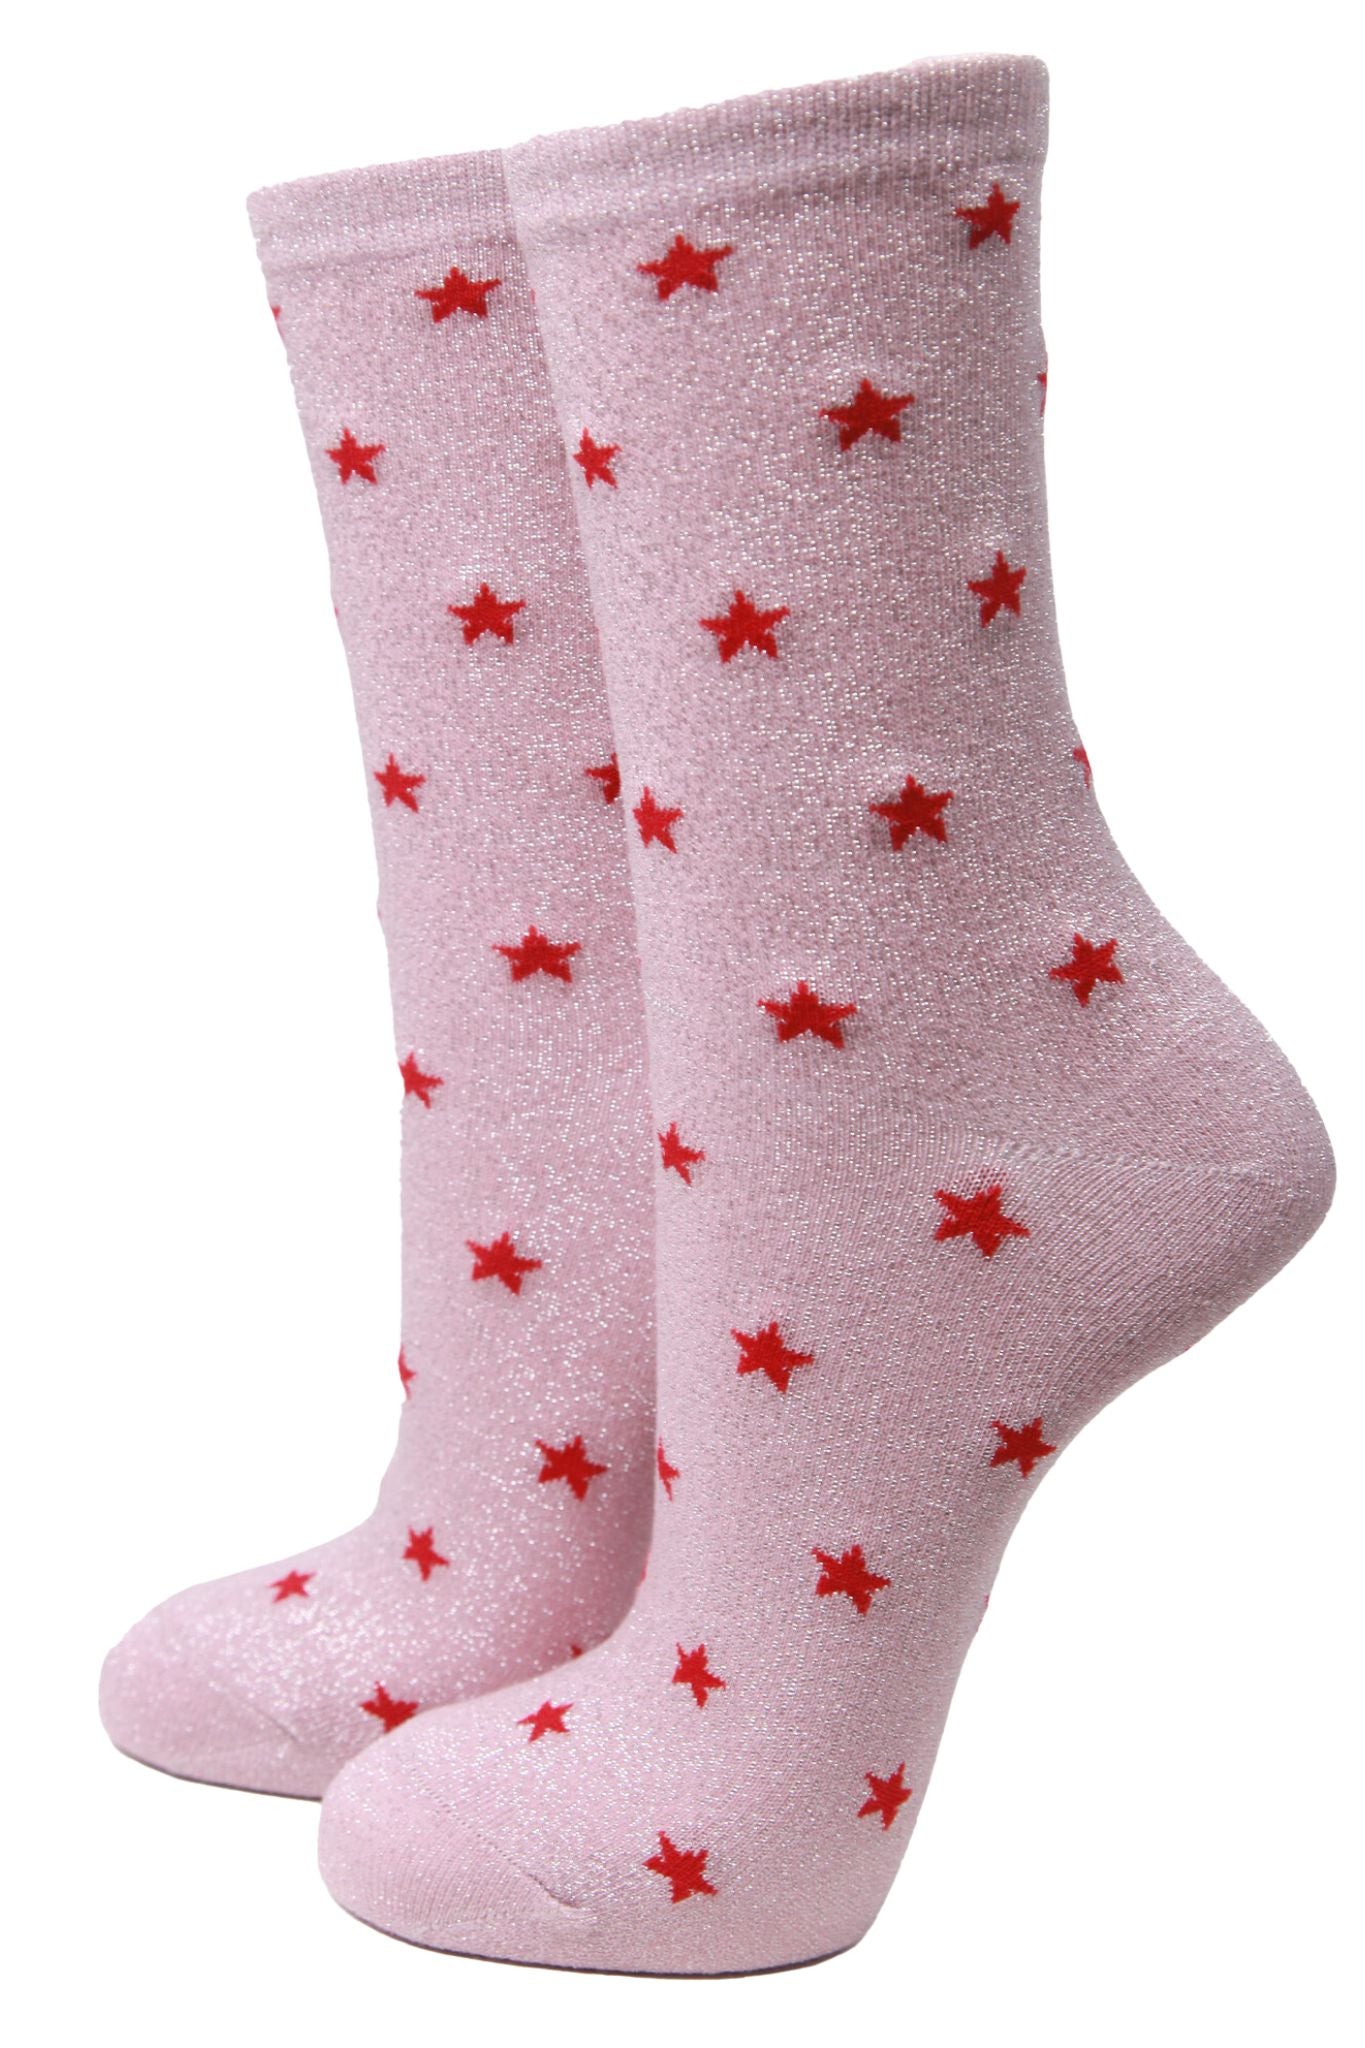 pink ankle socks with an all over silver glitter shimmer with red stars